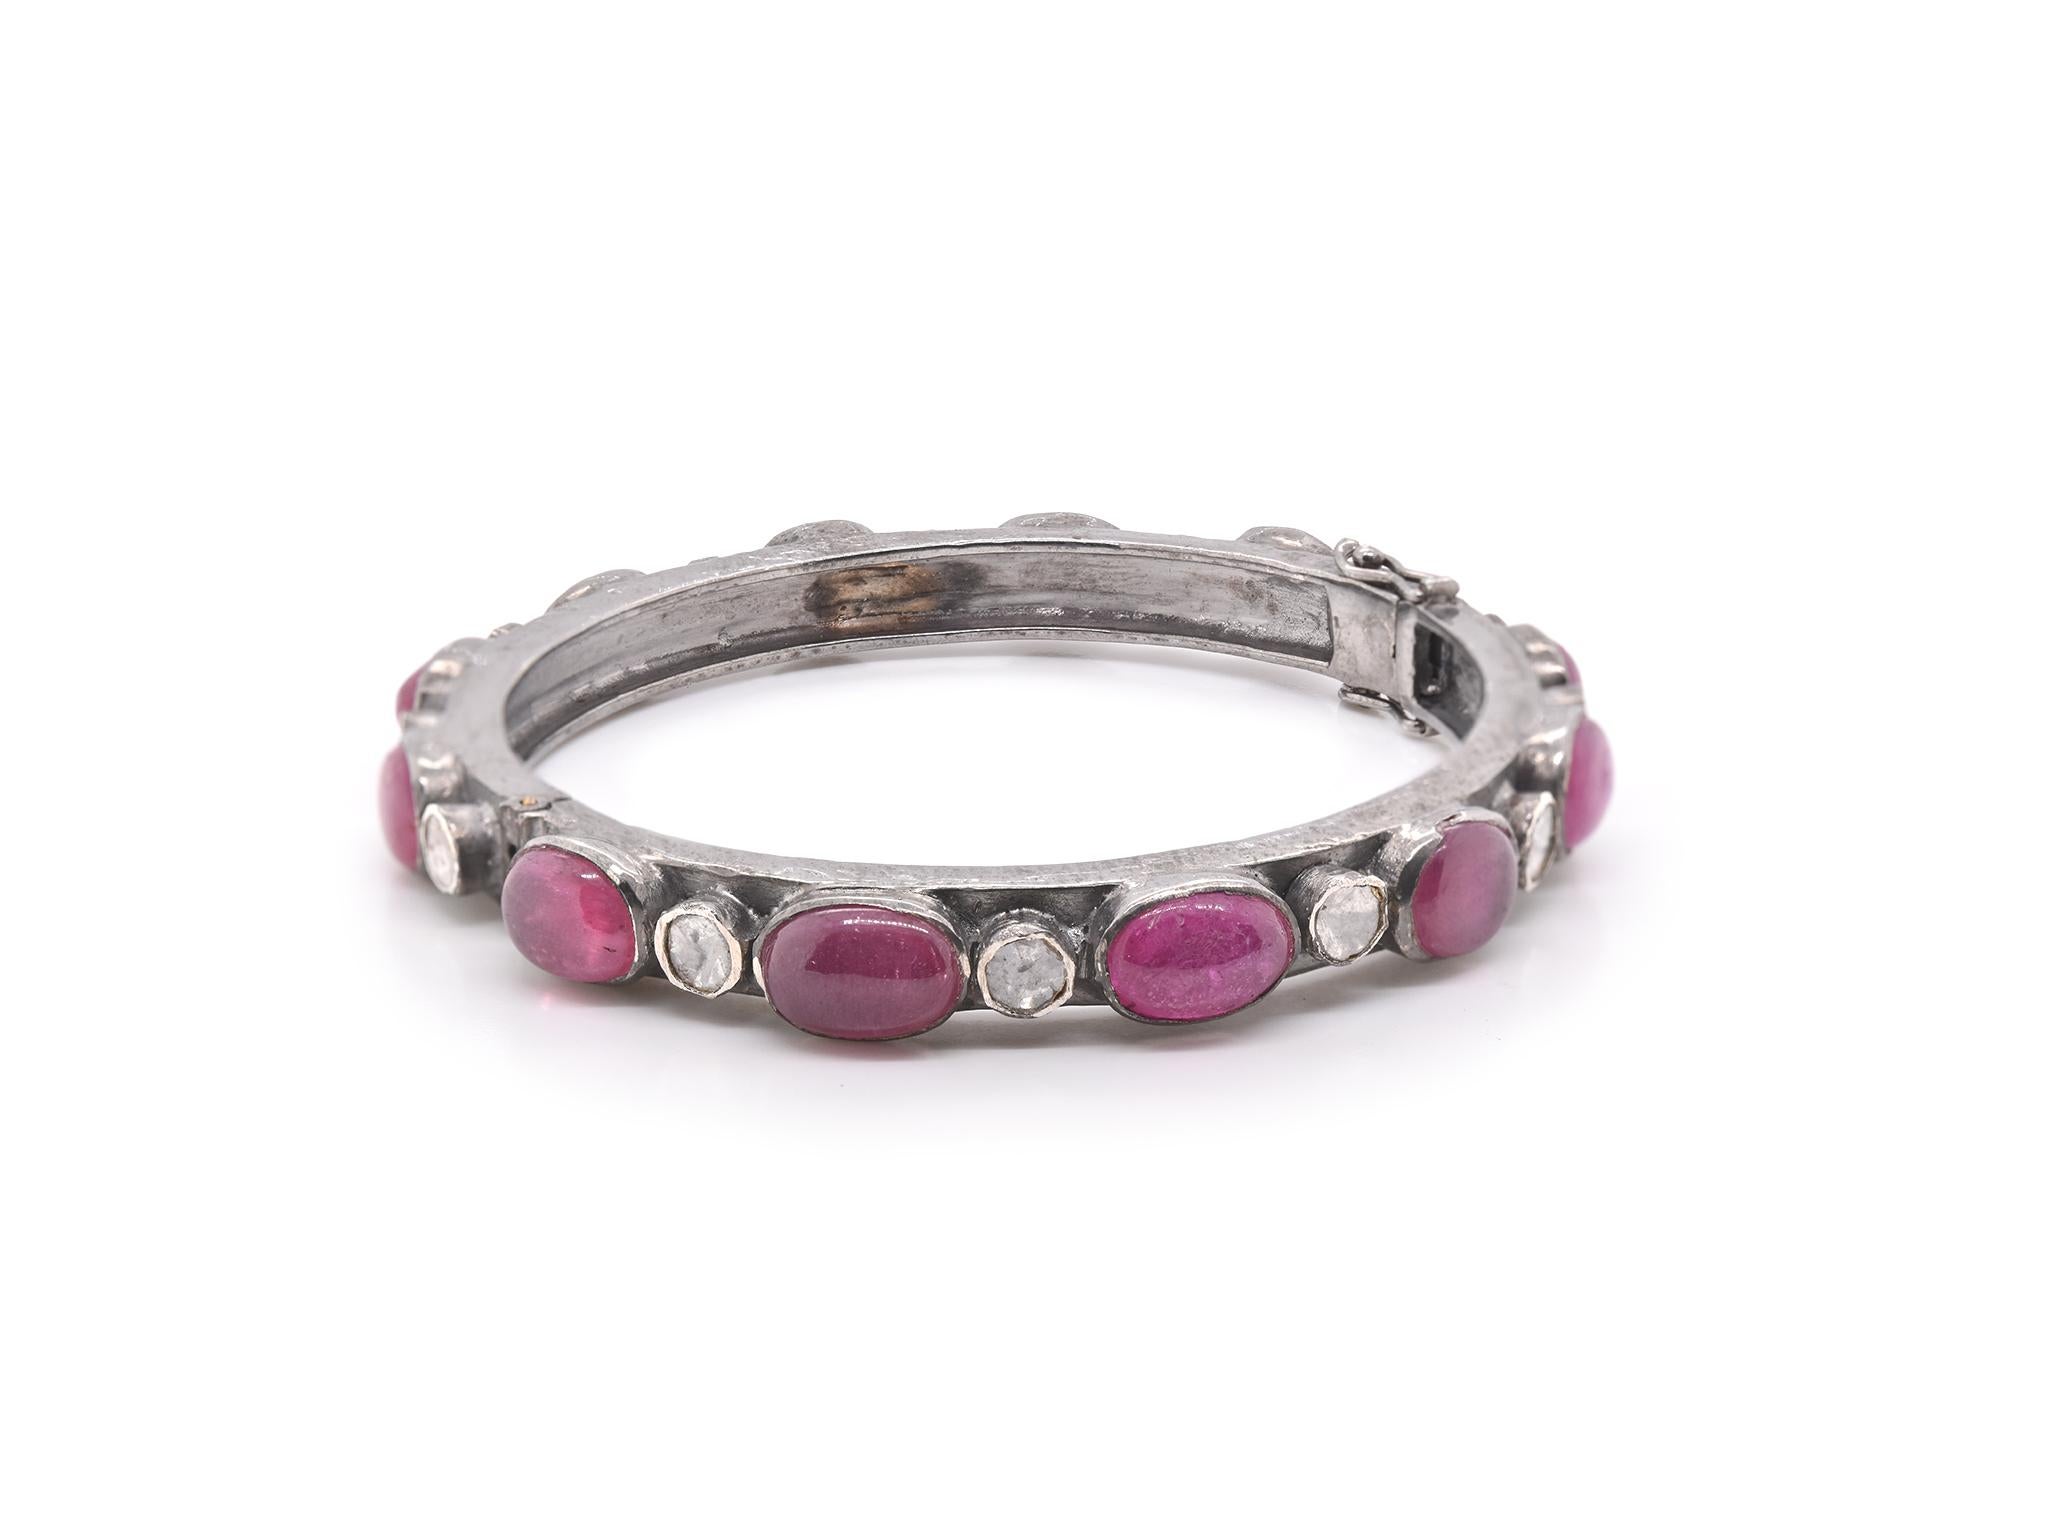 Designer: Custom
Material: Sterling Silver
Diamonds: 13 Slices 
Color: G-I
Clarity: I2-I3
Tourmaline: 12 Cabochon cut
Dimensions: bracelet measures 7.43mm in width
Size: 7.5
Weight: 45.2 grams
